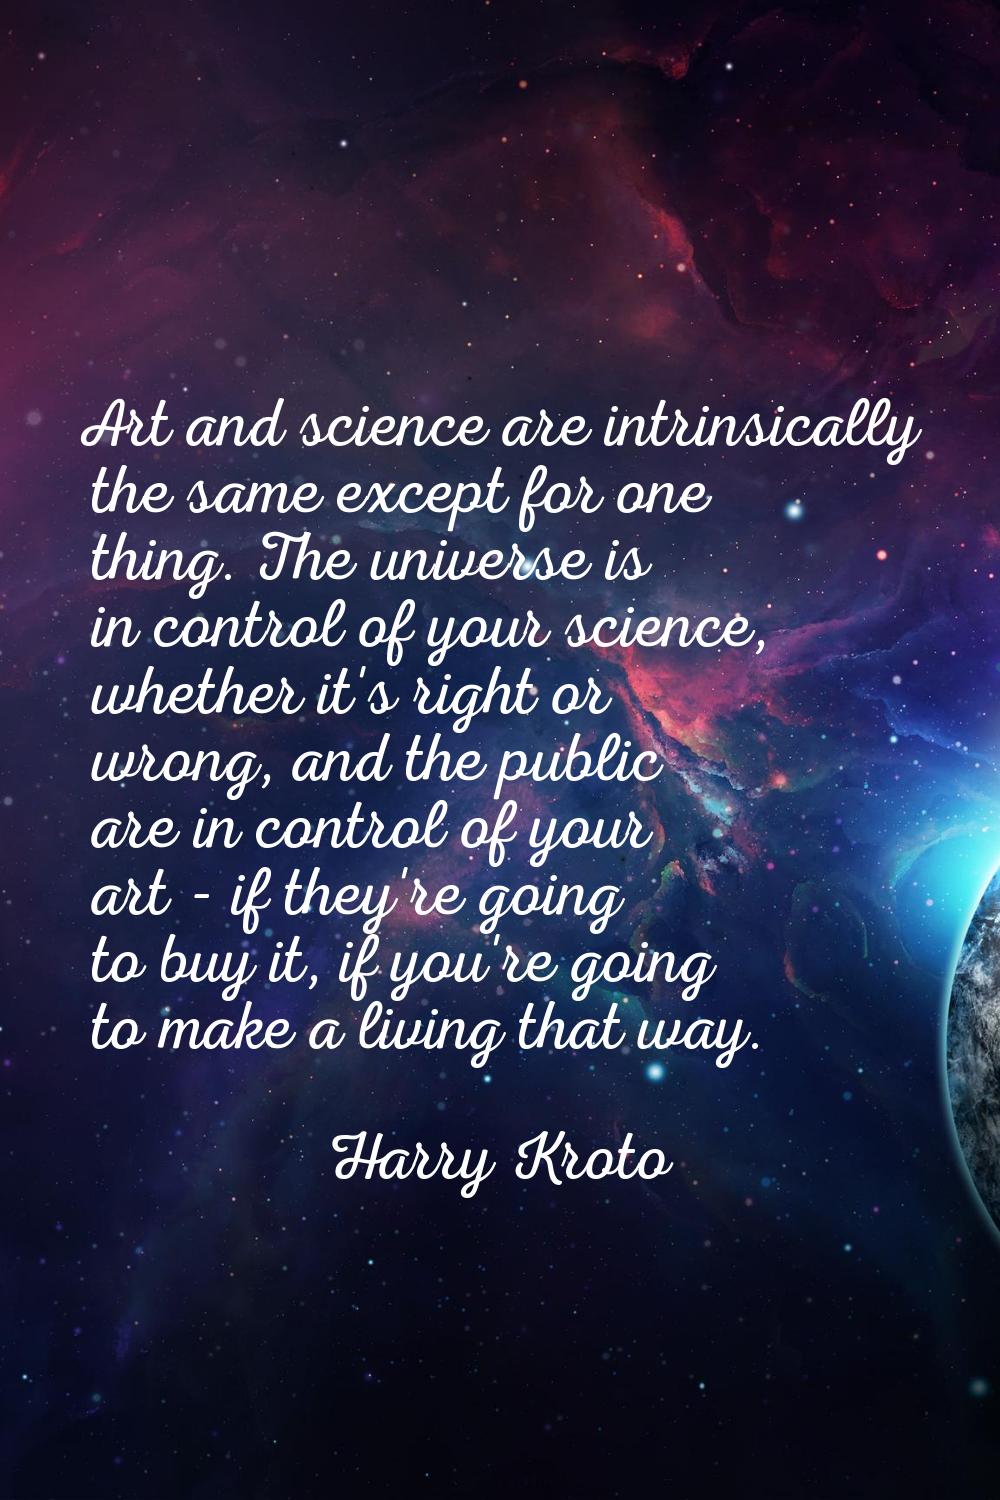 Art and science are intrinsically the same except for one thing. The universe is in control of your